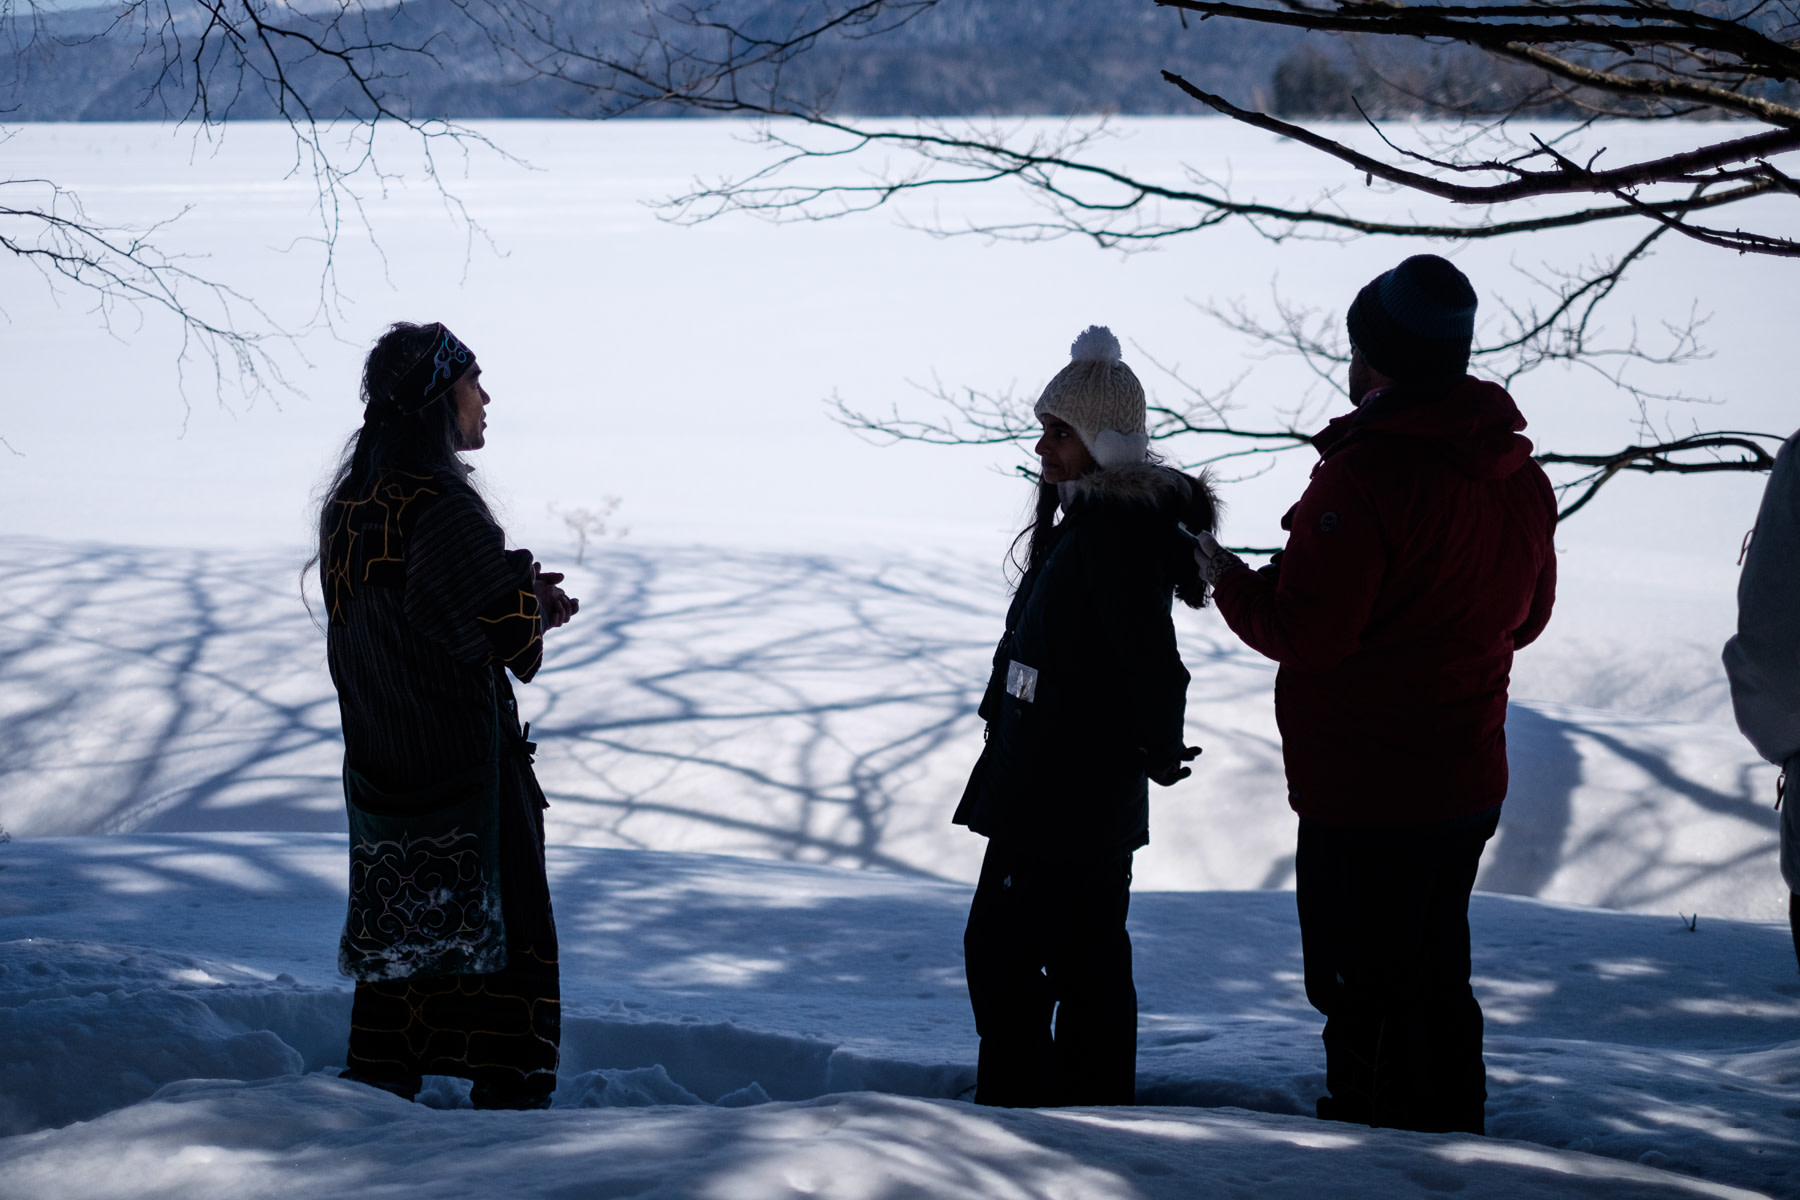 An Ainu guide and two guests are silhouetted with frozen Lake Akan in the background.